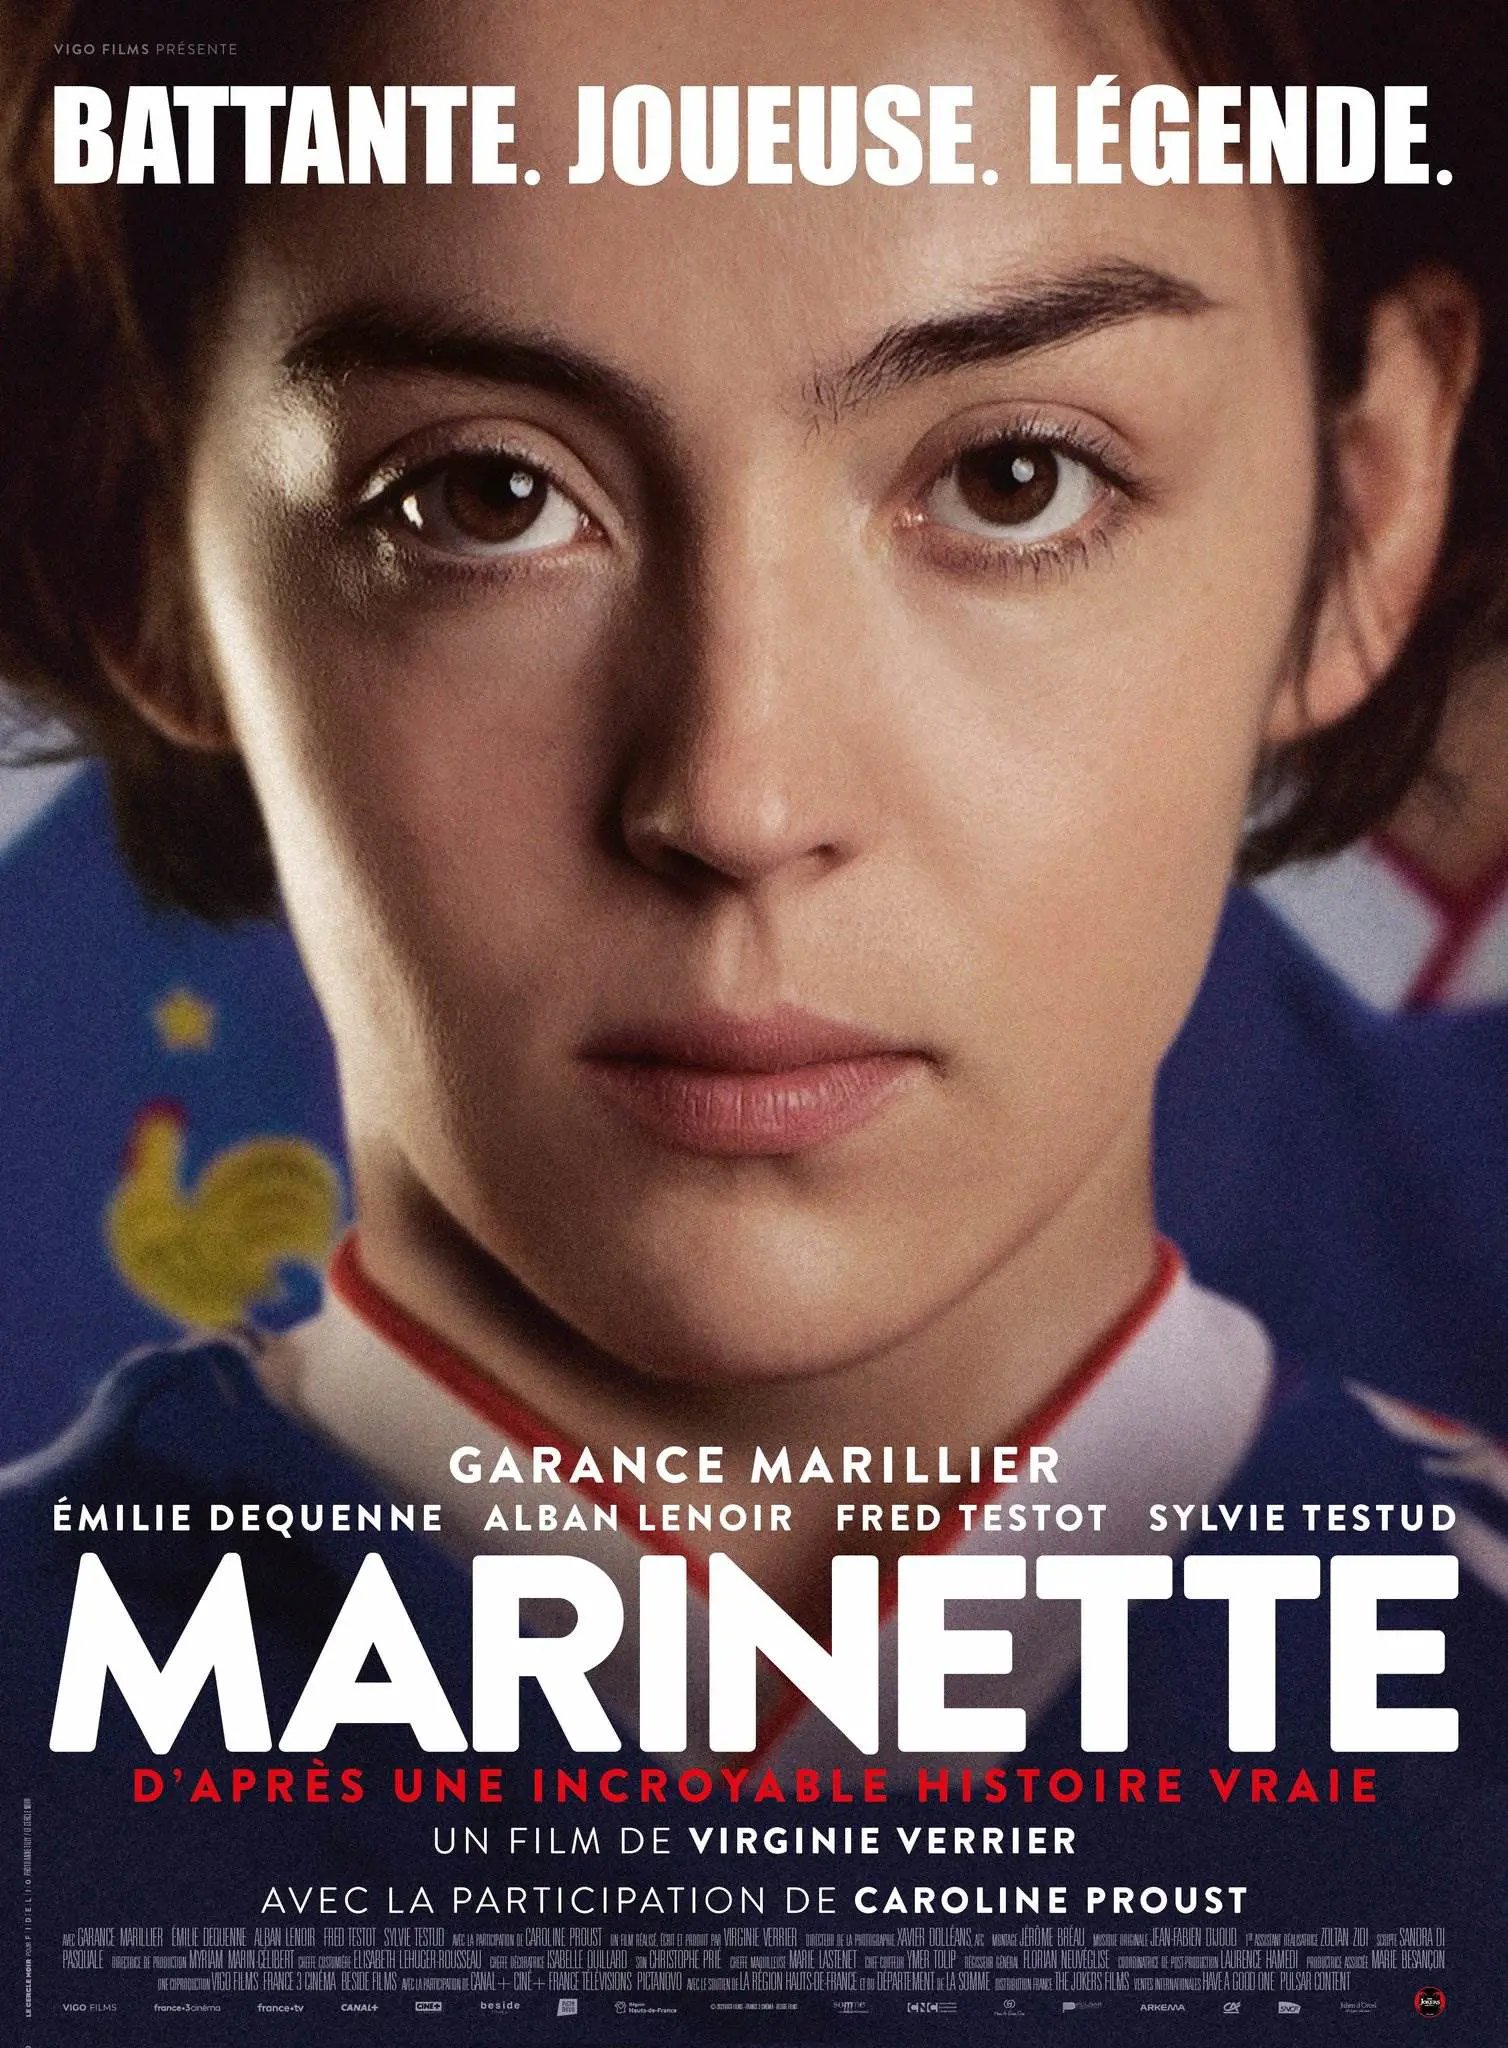 Official Poster Of Biopic Marinette Made By Virginie Verrier